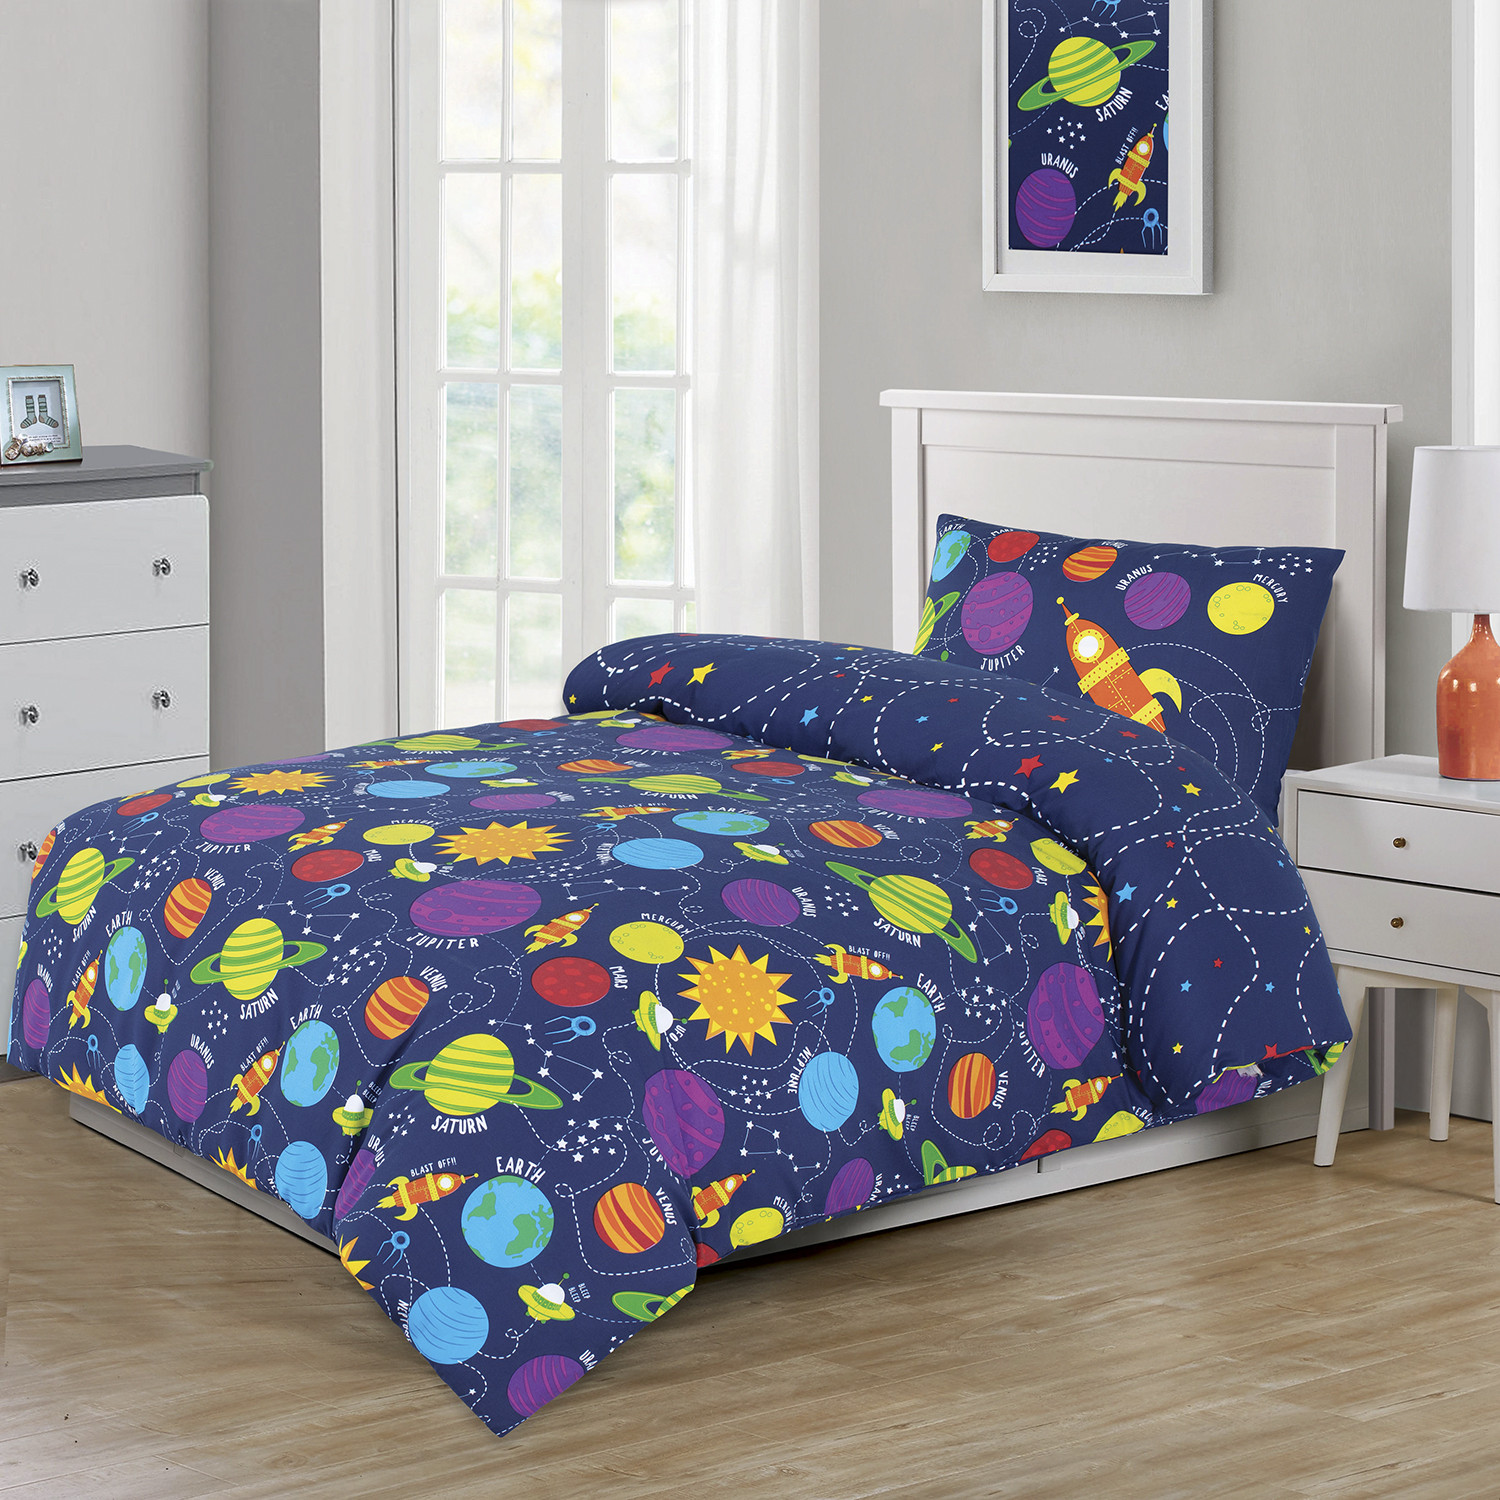 Sleep in Space Single Glow In The Dark Duvet Cover and Pillowcase Set Image 1